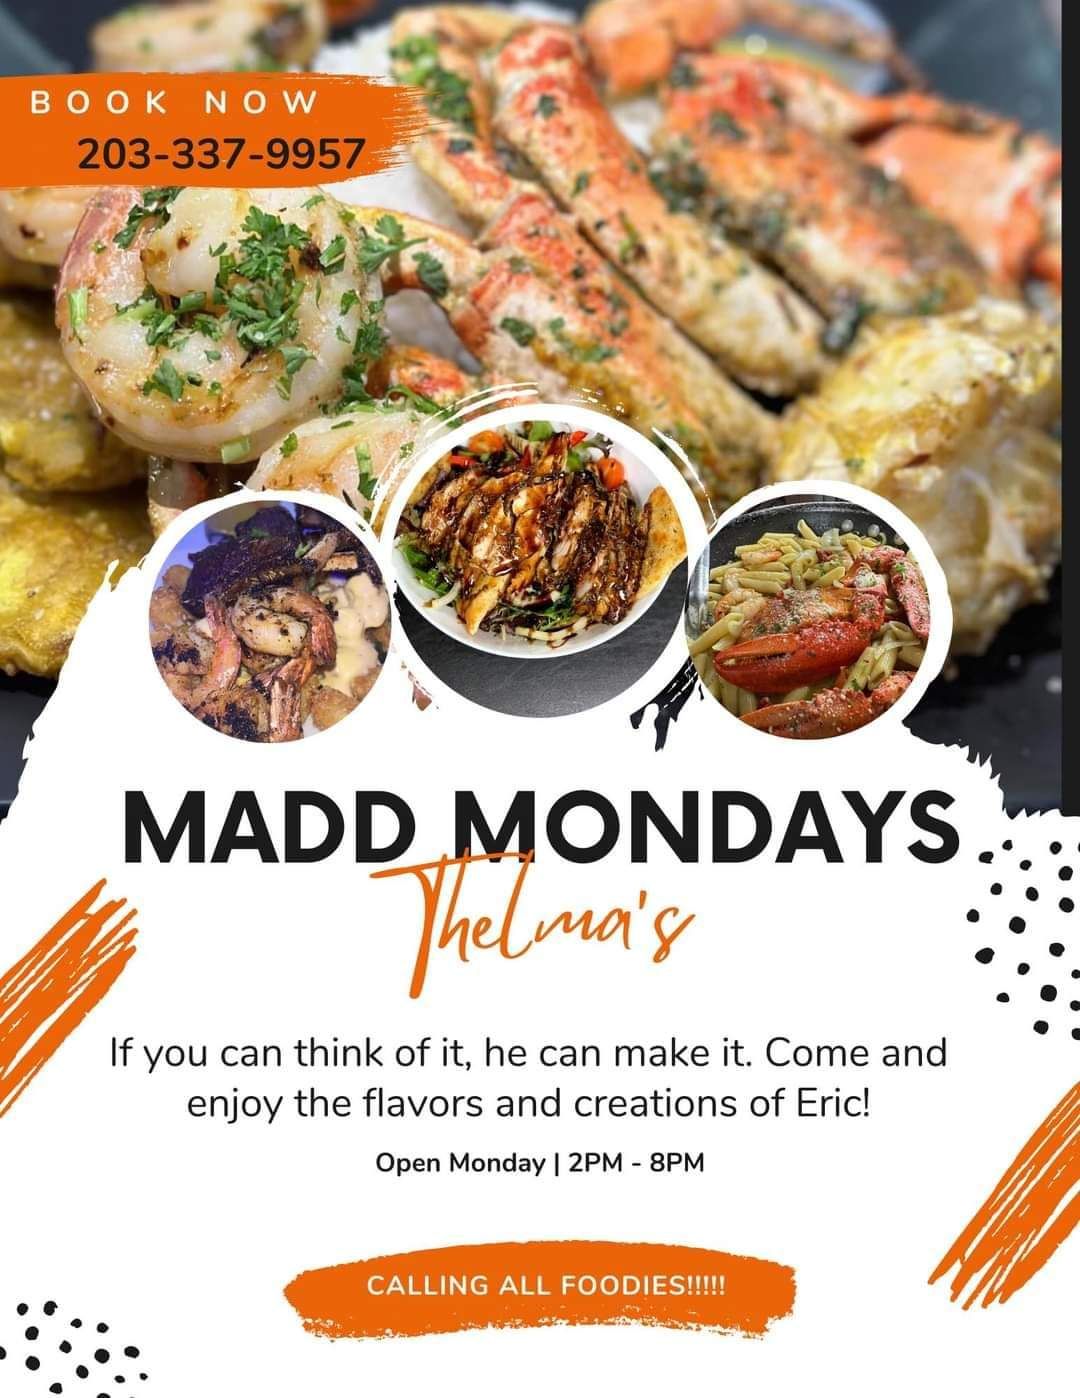 SEE WHAT THE FOODIES ARE RAVING ABOUT NOW: MADD MONDAYS AT THELMAS